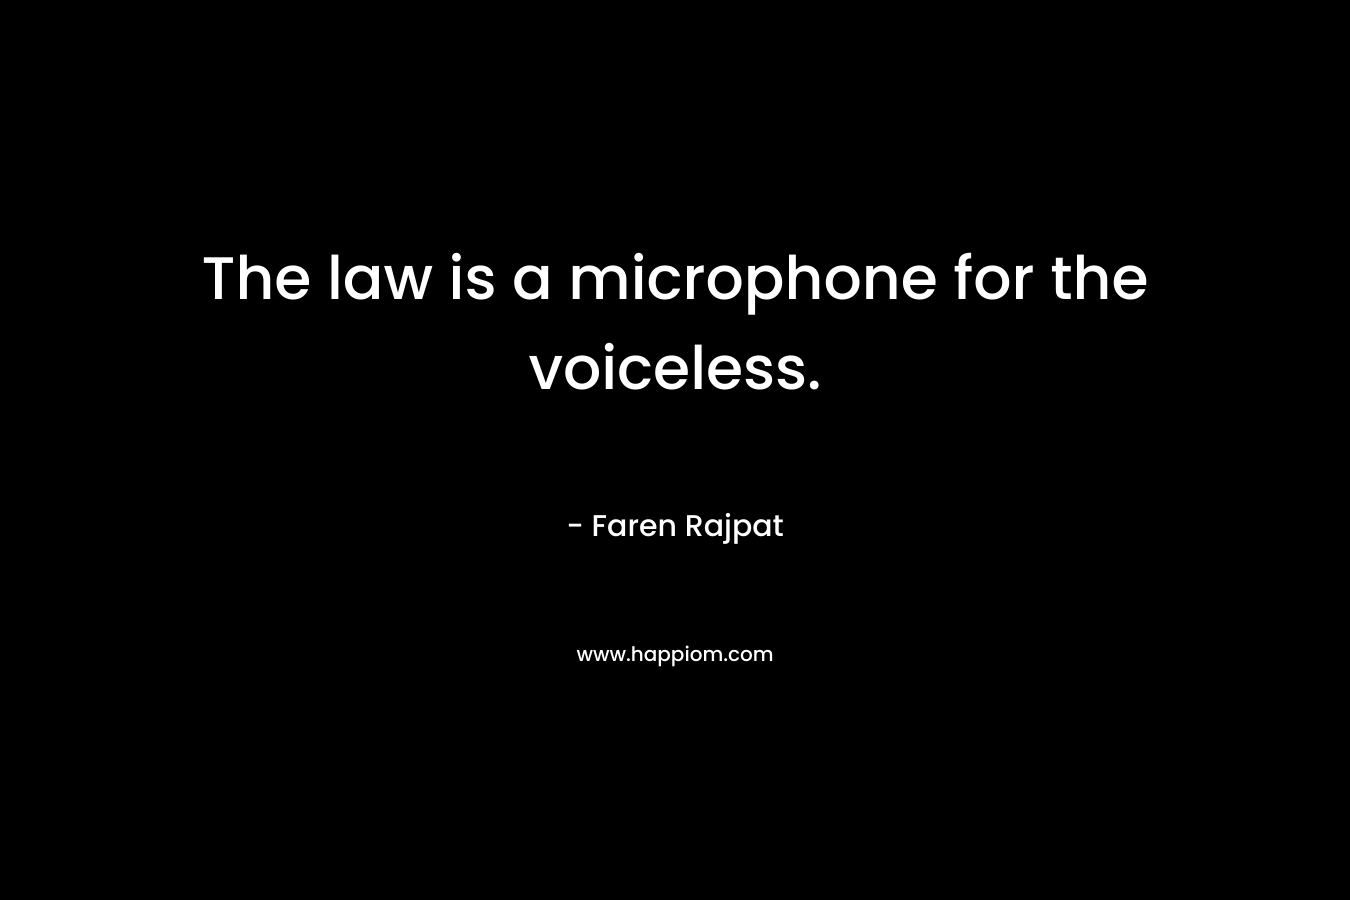 The law is a microphone for the voiceless. – Faren Rajpat